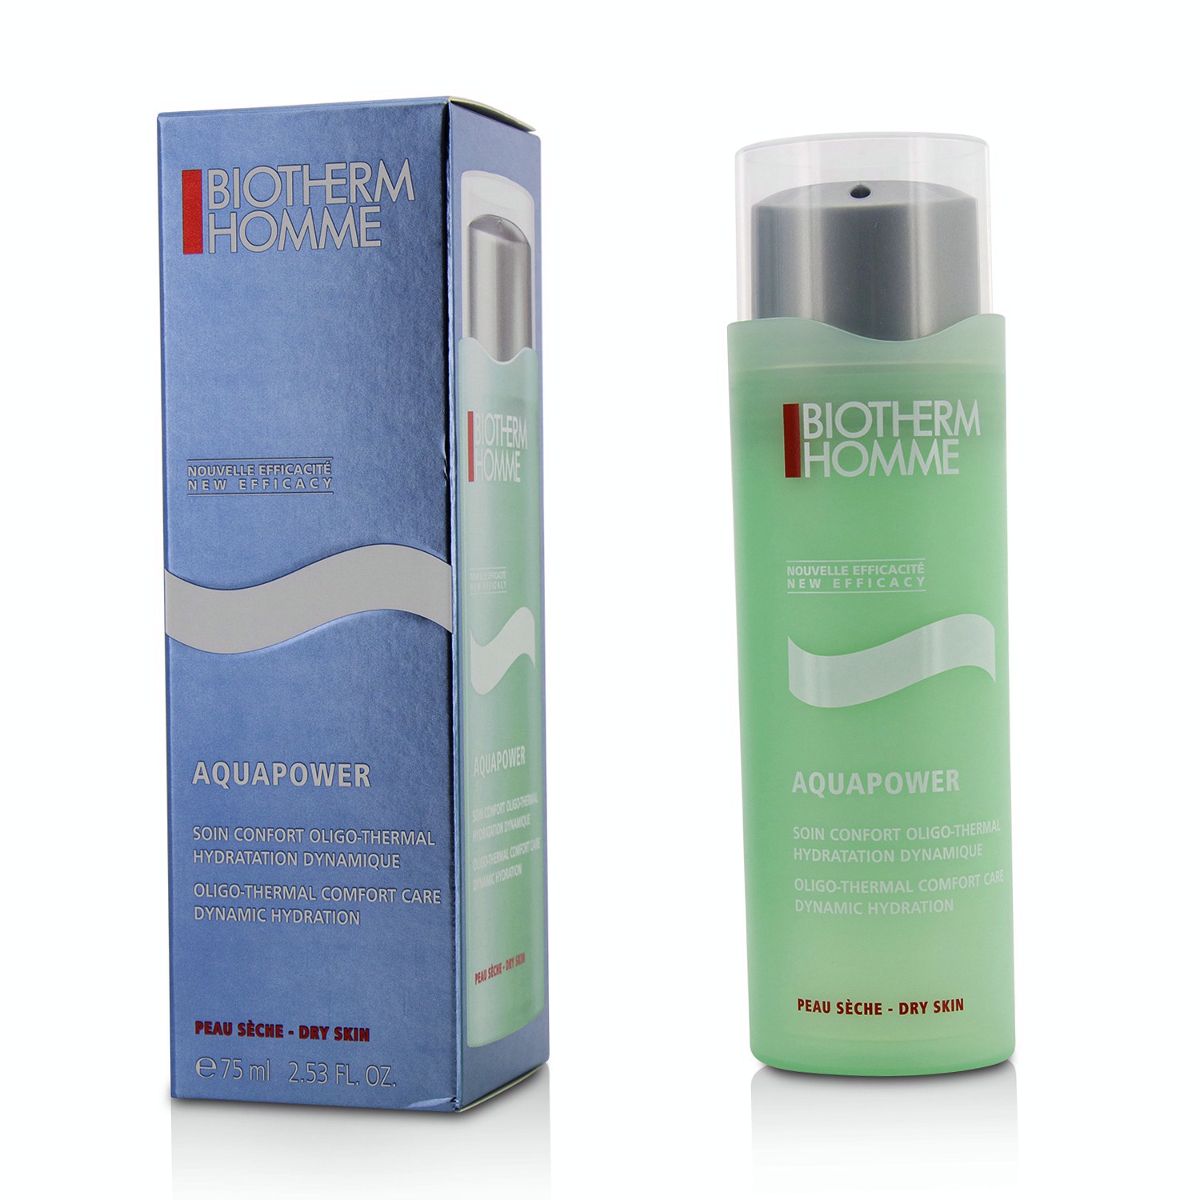 Homme Aquapower - Dry Skin (New Packaging) Biotherm Image